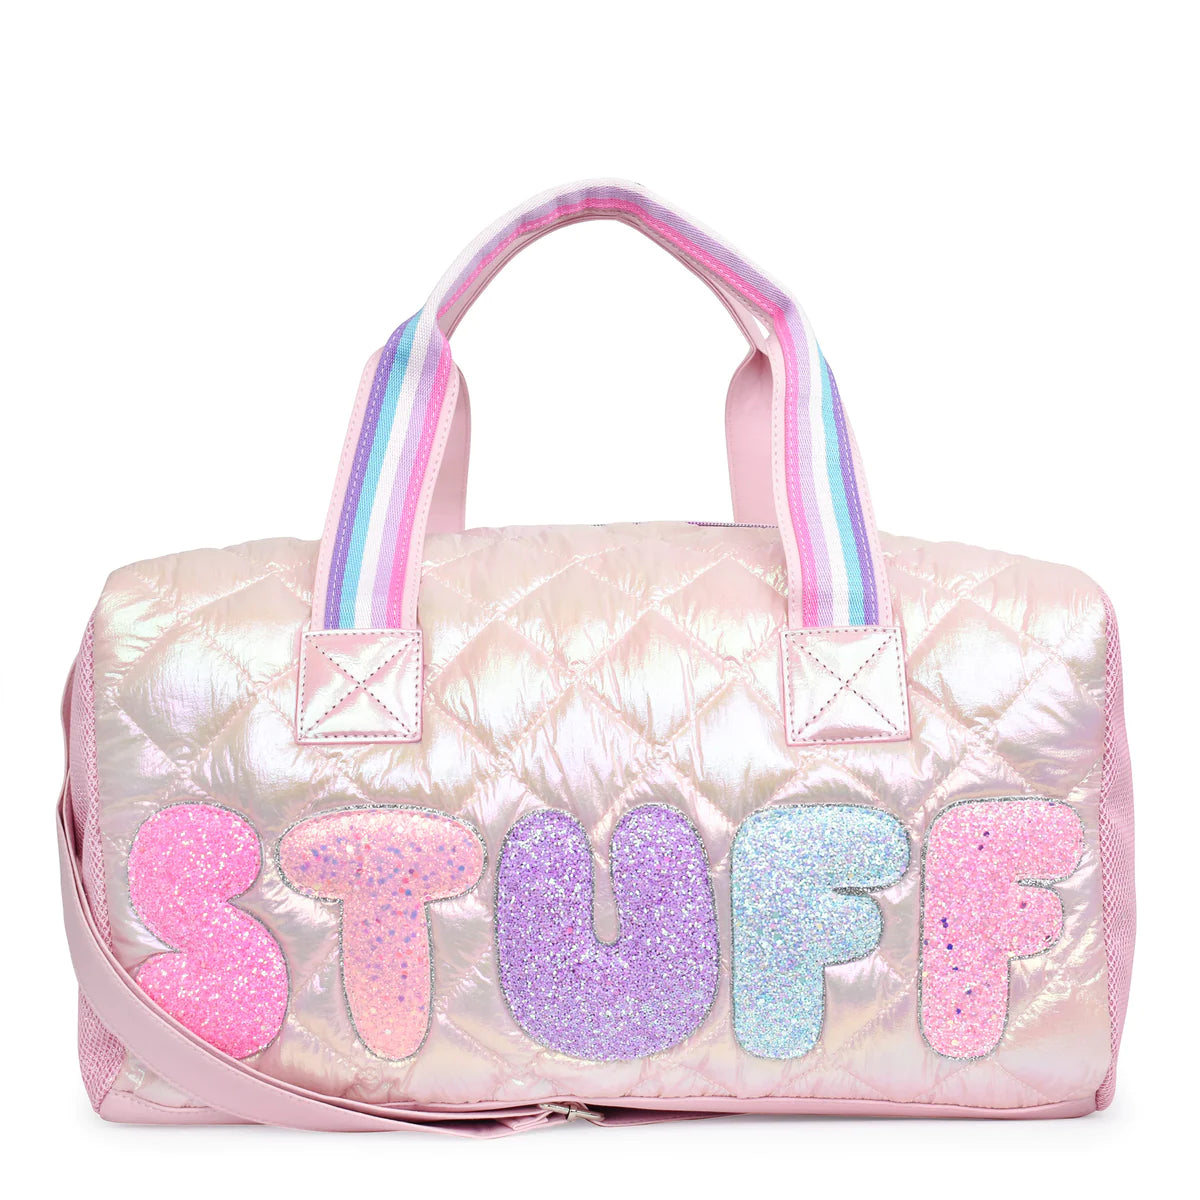 Stuff Quilted Metallic Large Duffle Bag